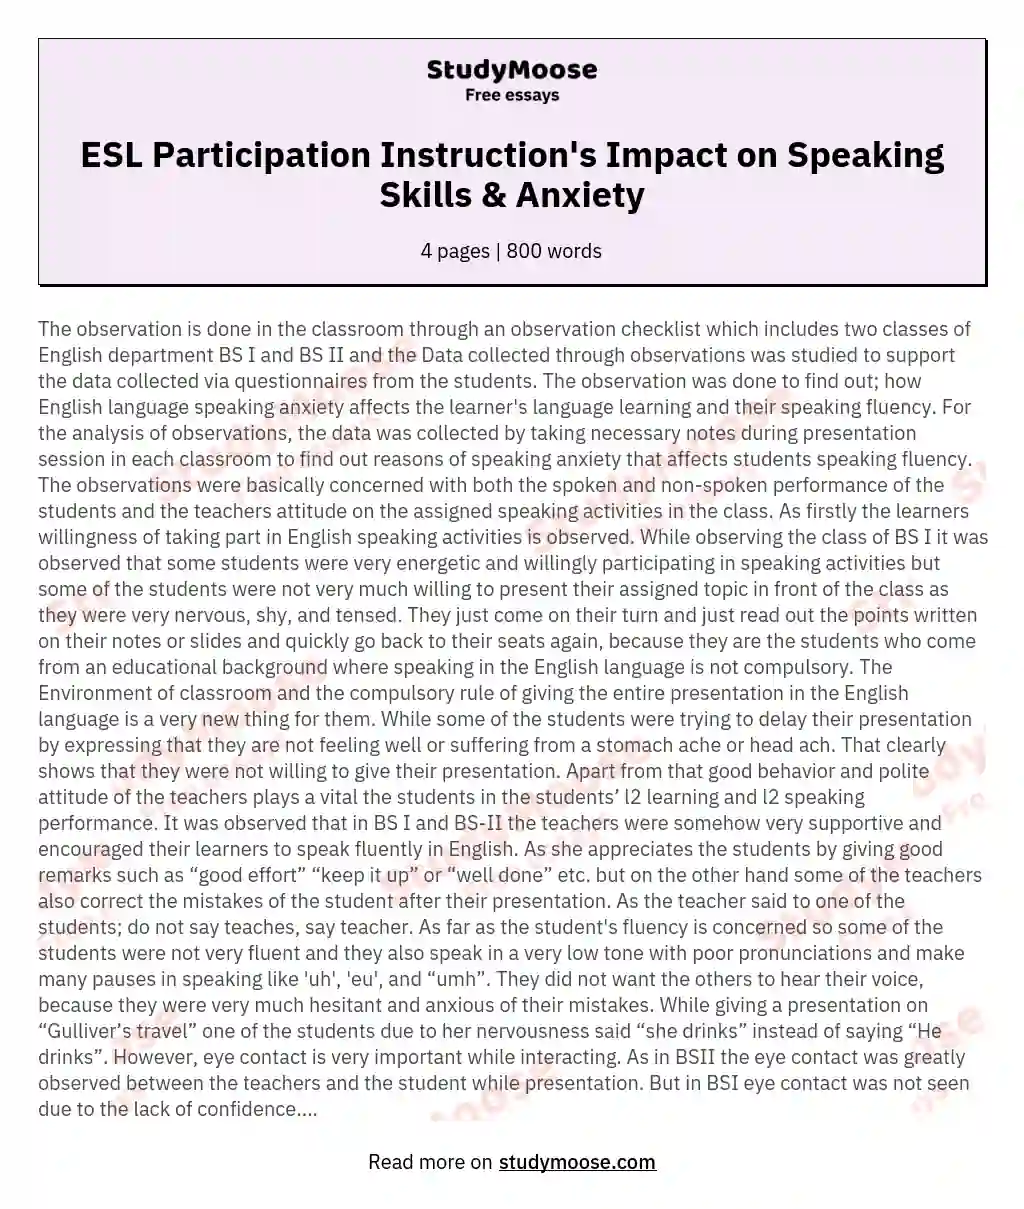 ESL Participation Instruction's Impact on Speaking Skills & Anxiety essay